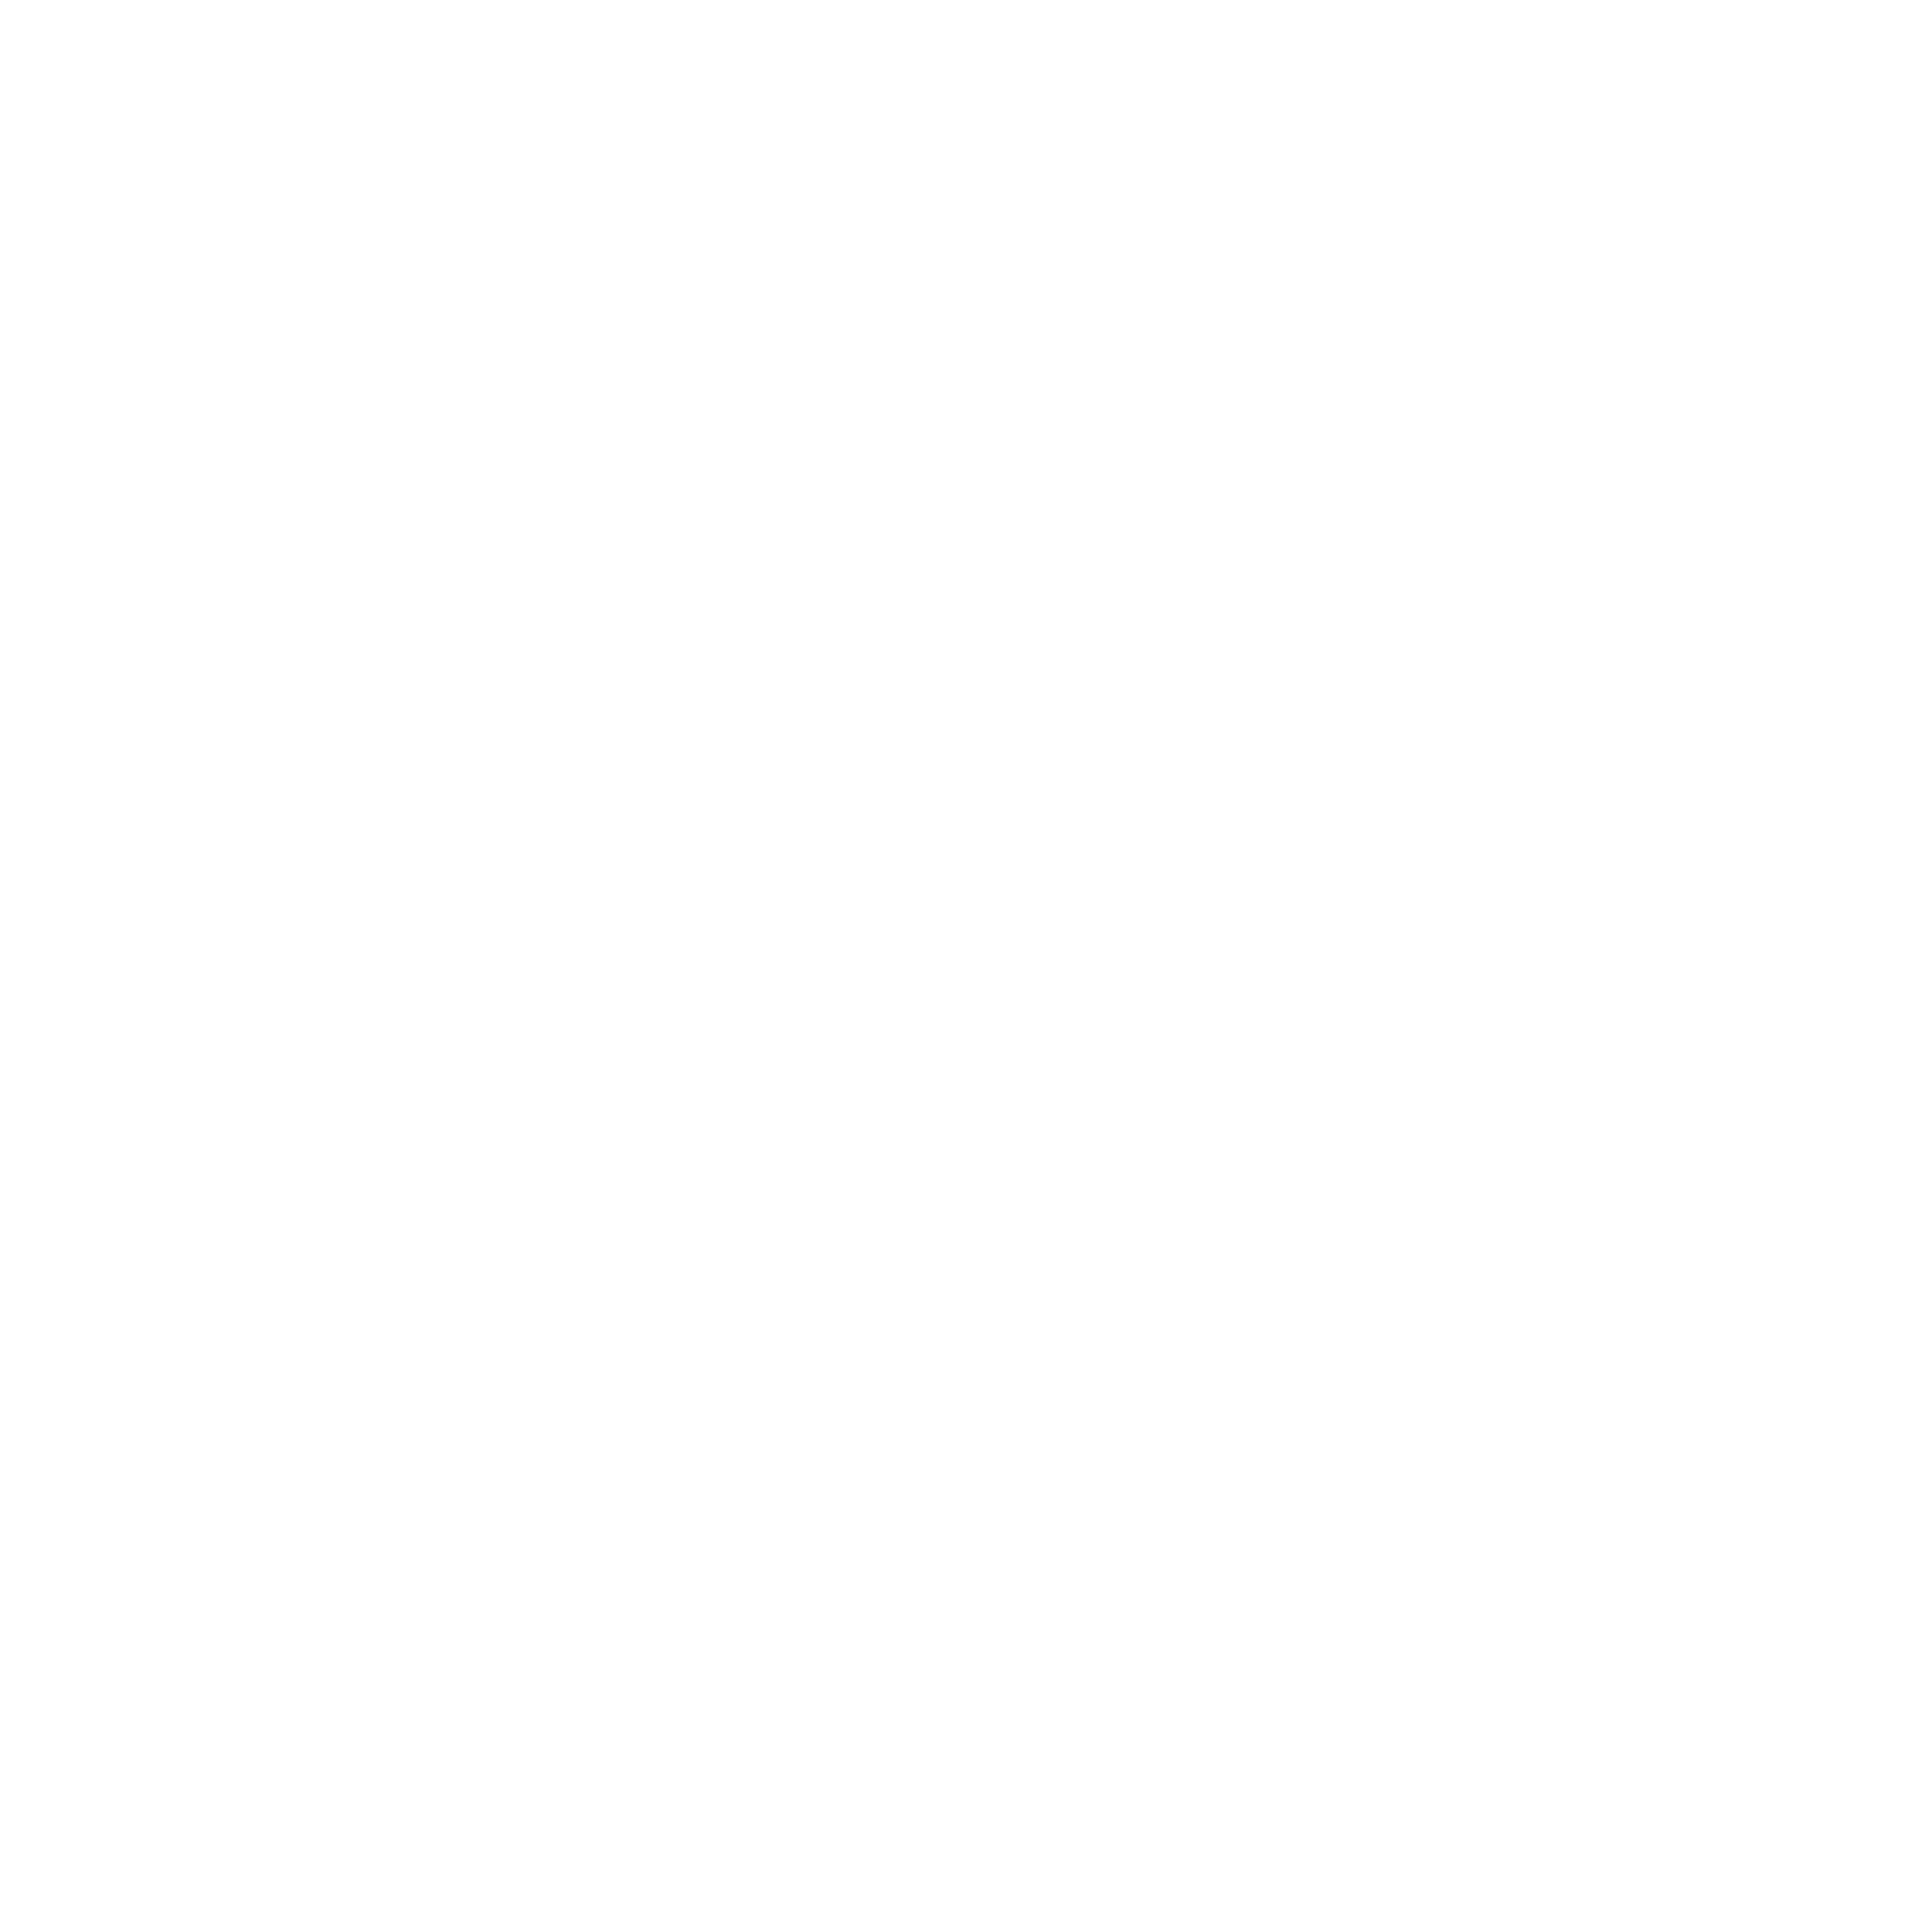 barconnect